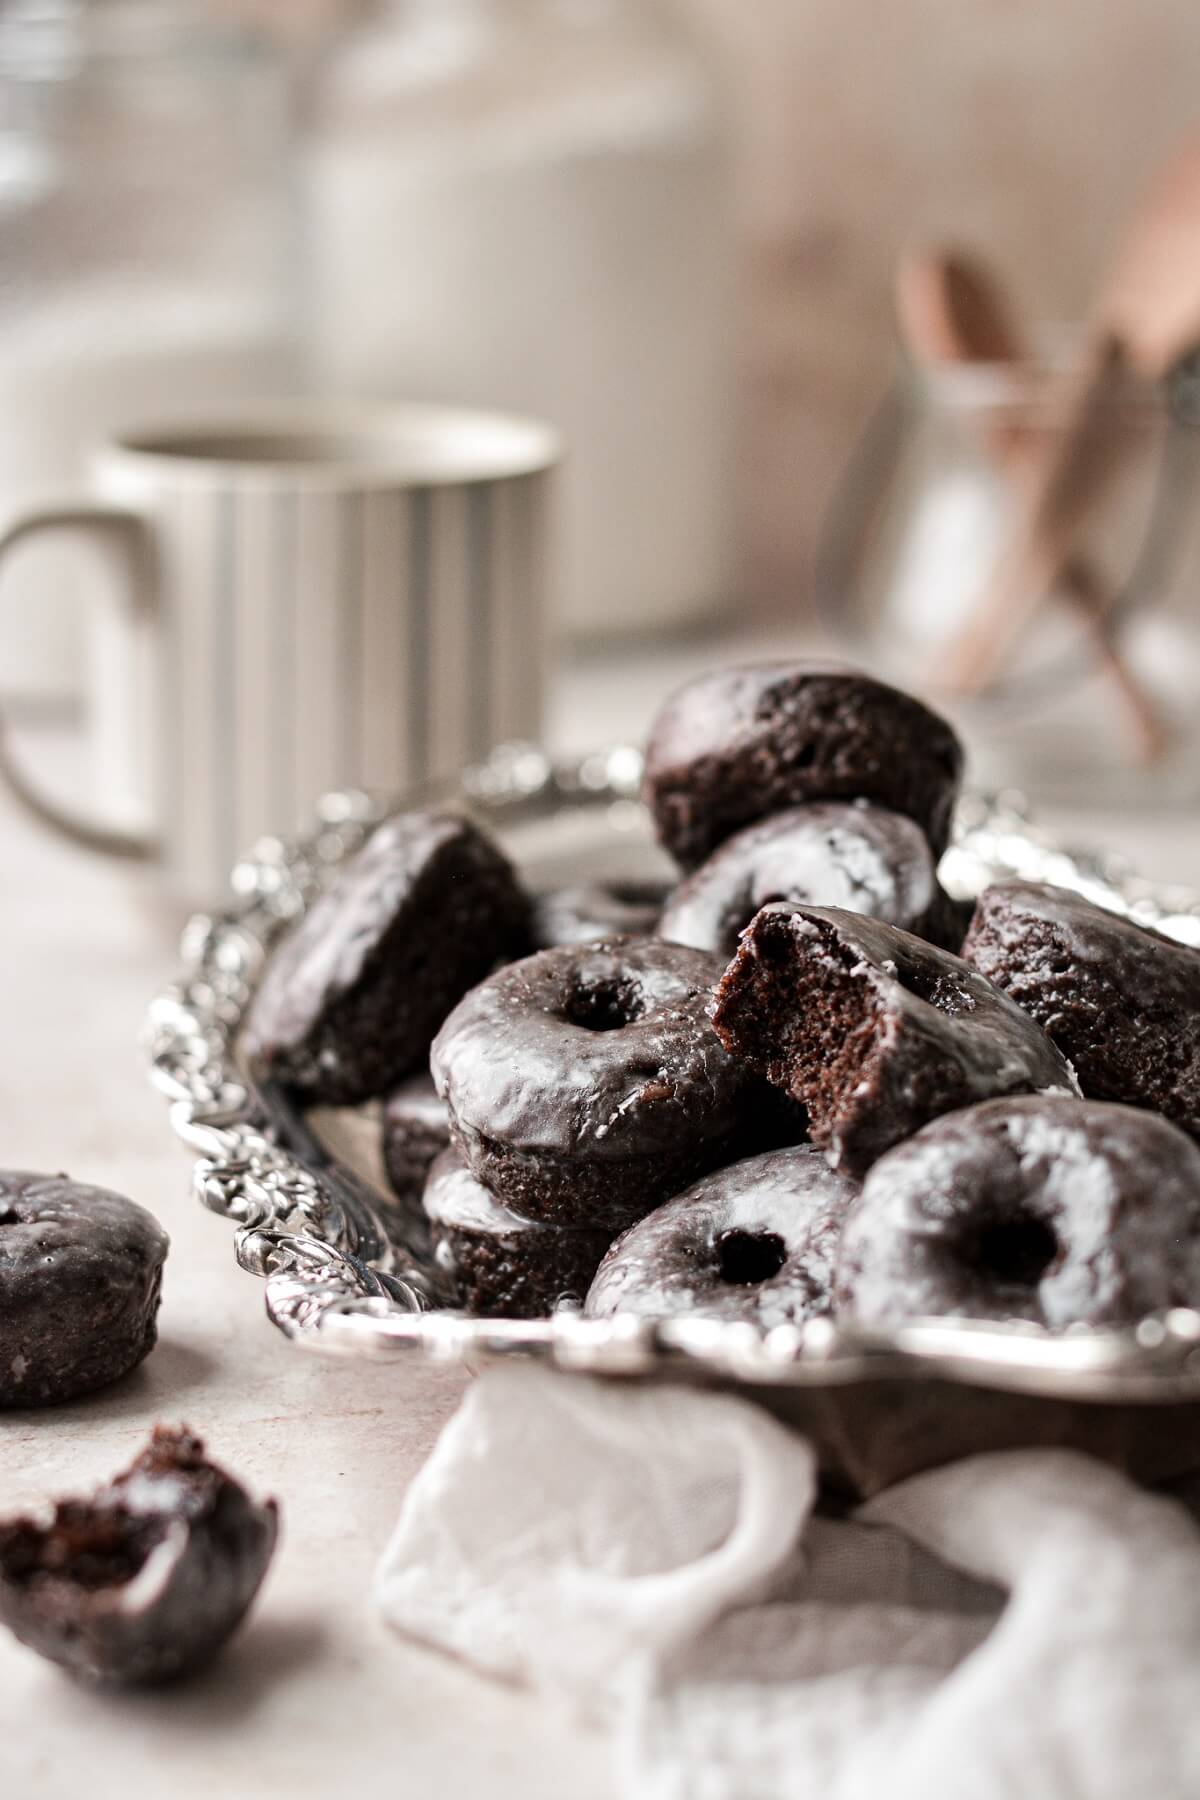 Baked chocolate cake doughnuts on a silver plate.